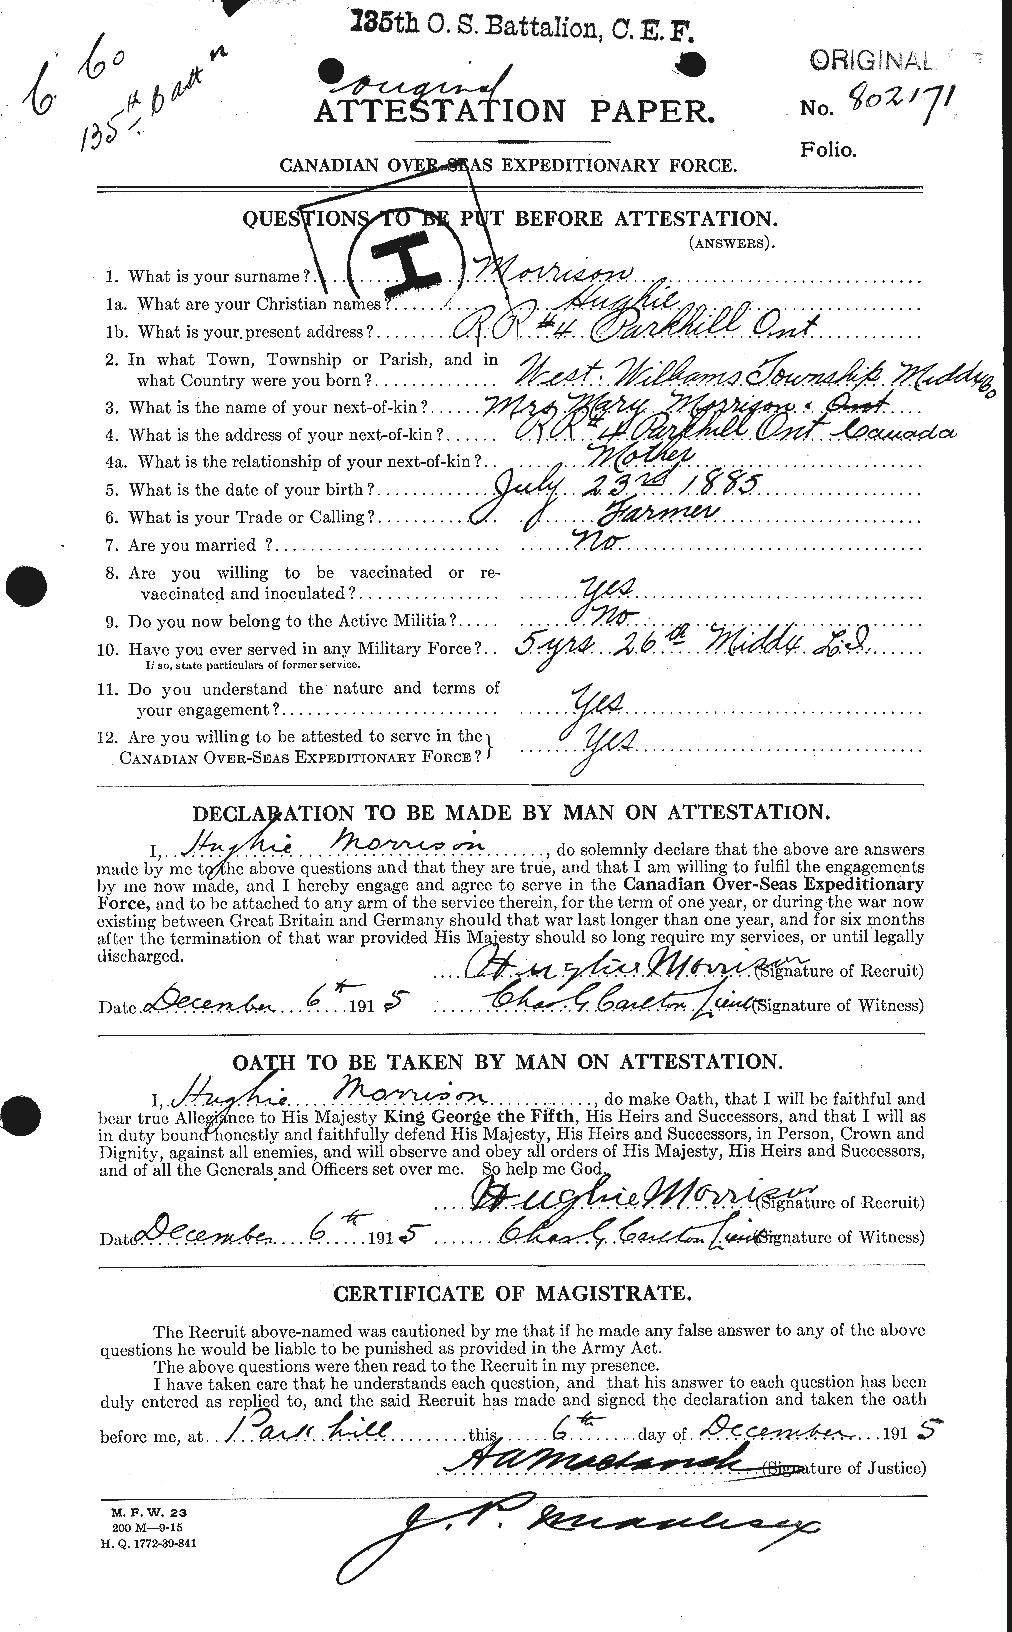 Personnel Records of the First World War - CEF 506878a